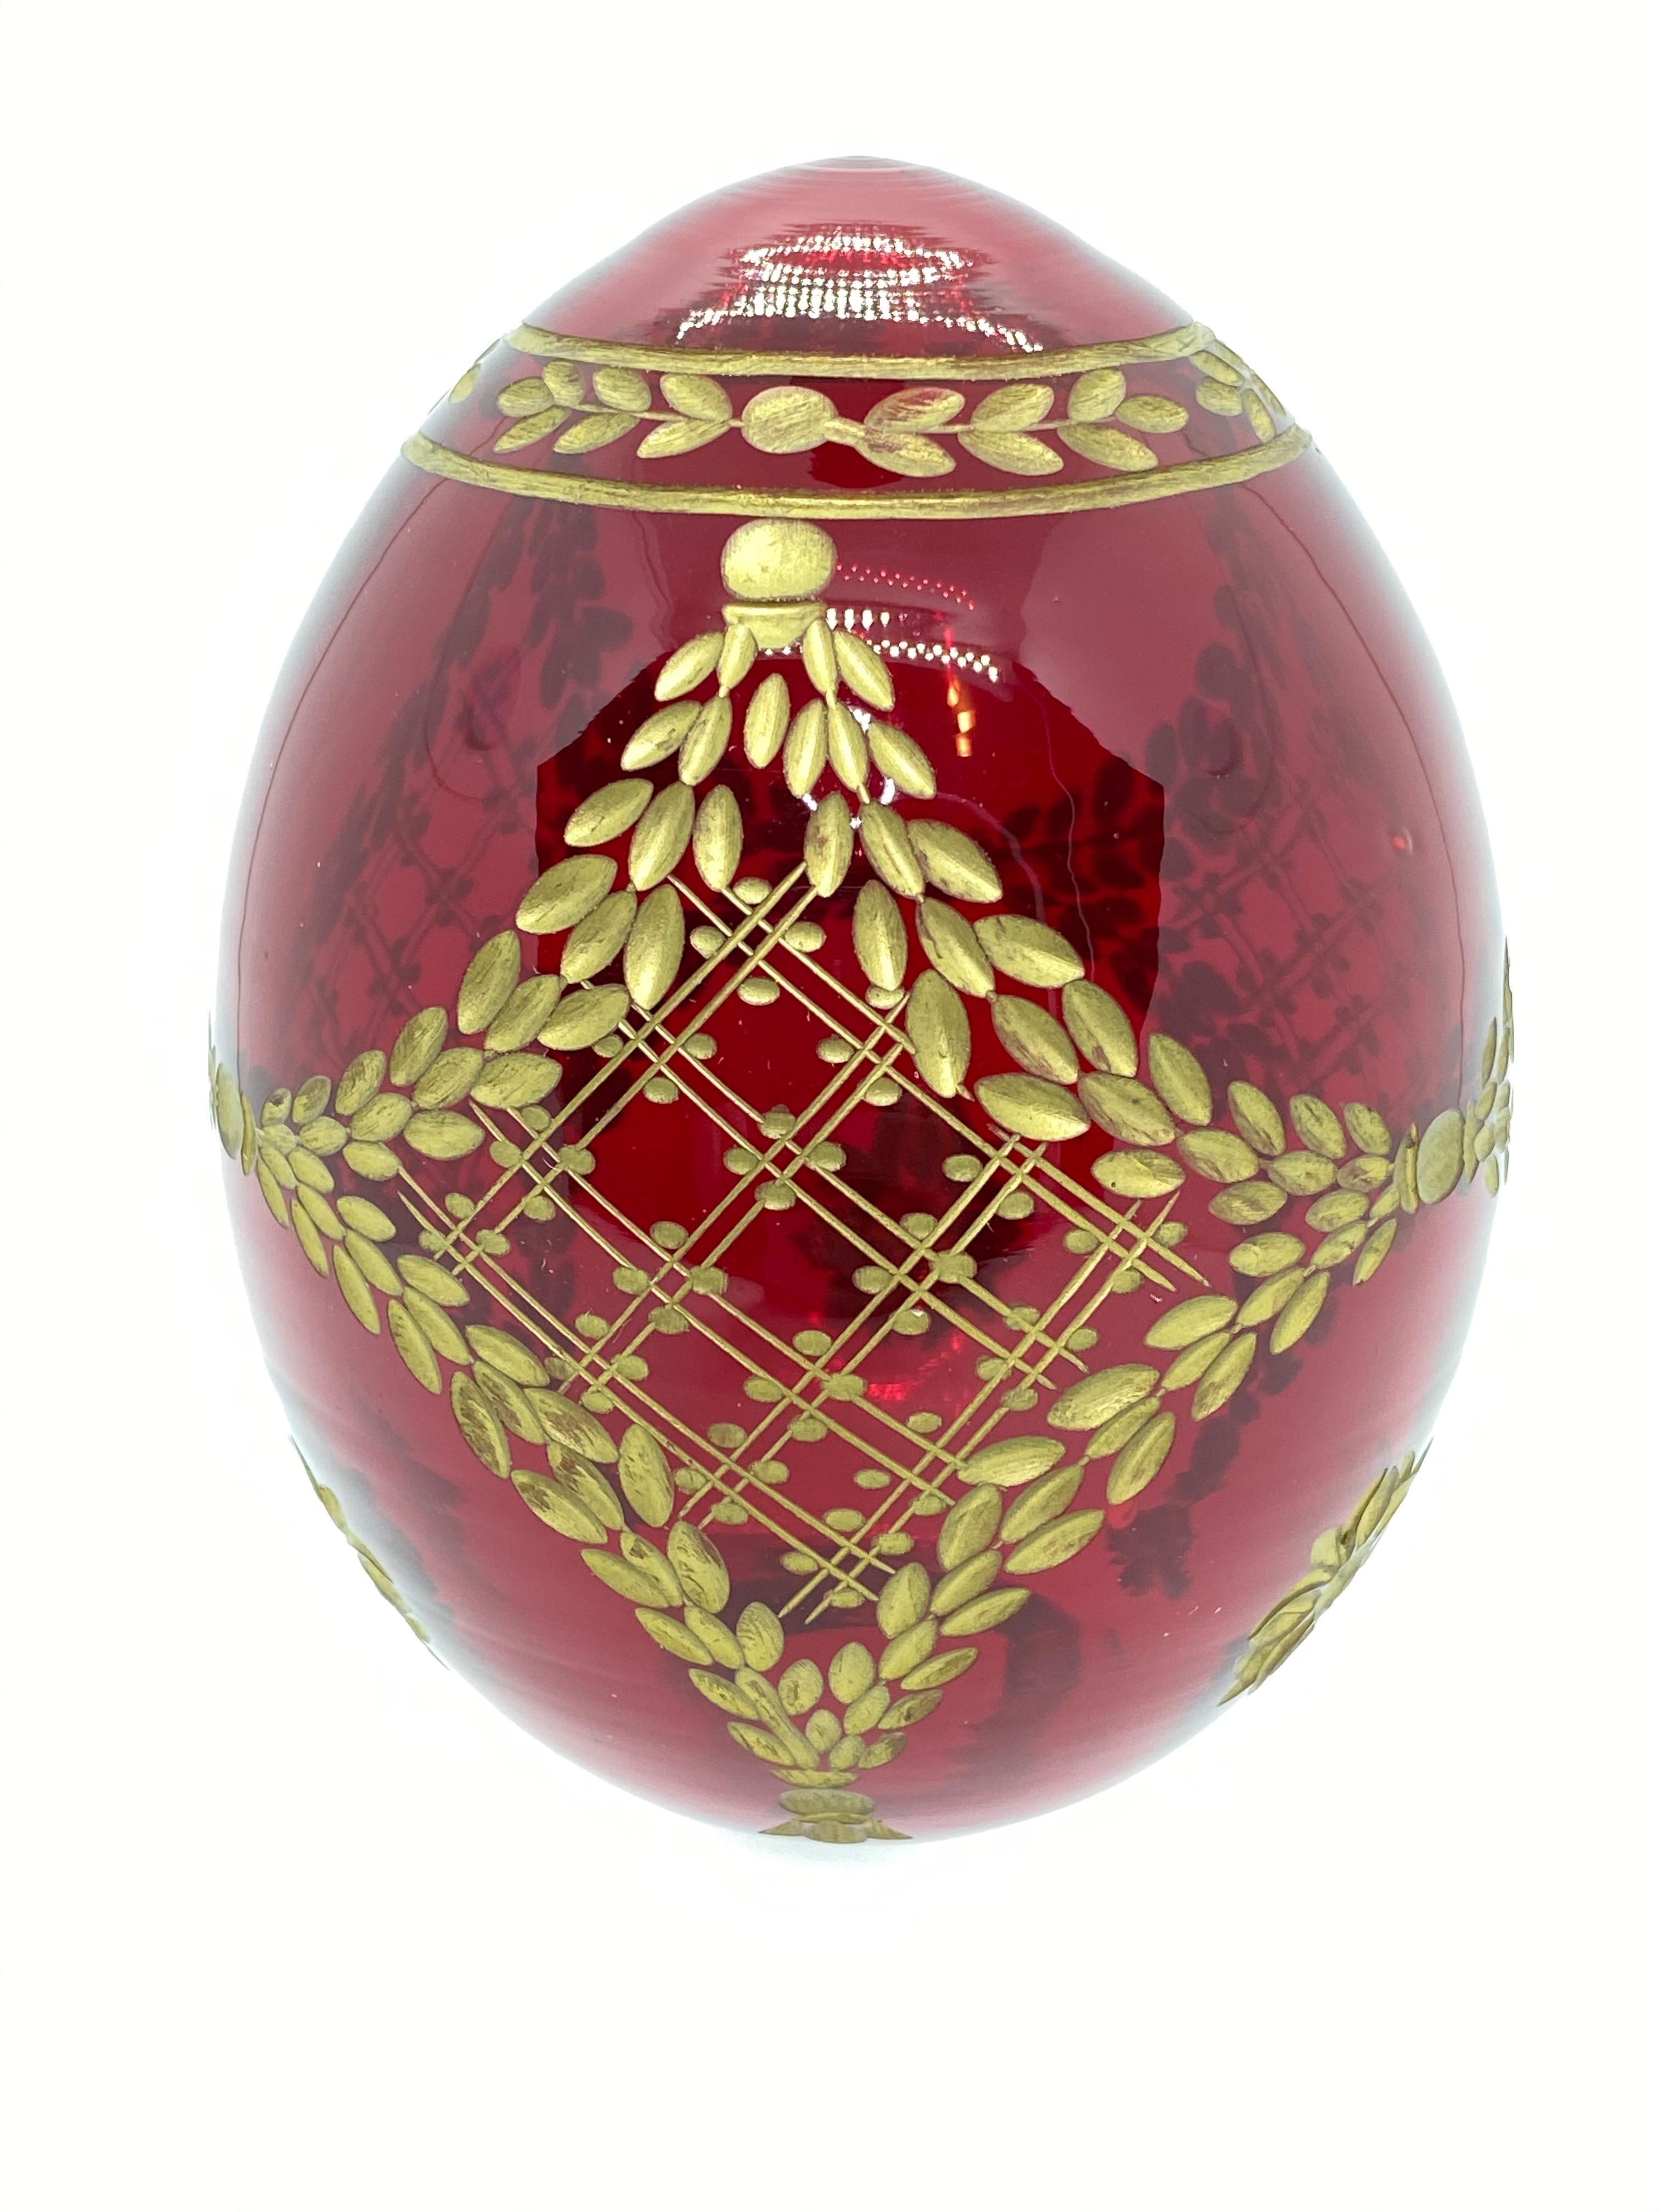 Vintage Faberge Russia style glass egg with etched royal garnishment. Reminiscent of eggs from St. Petersburg. Measures: 2.88